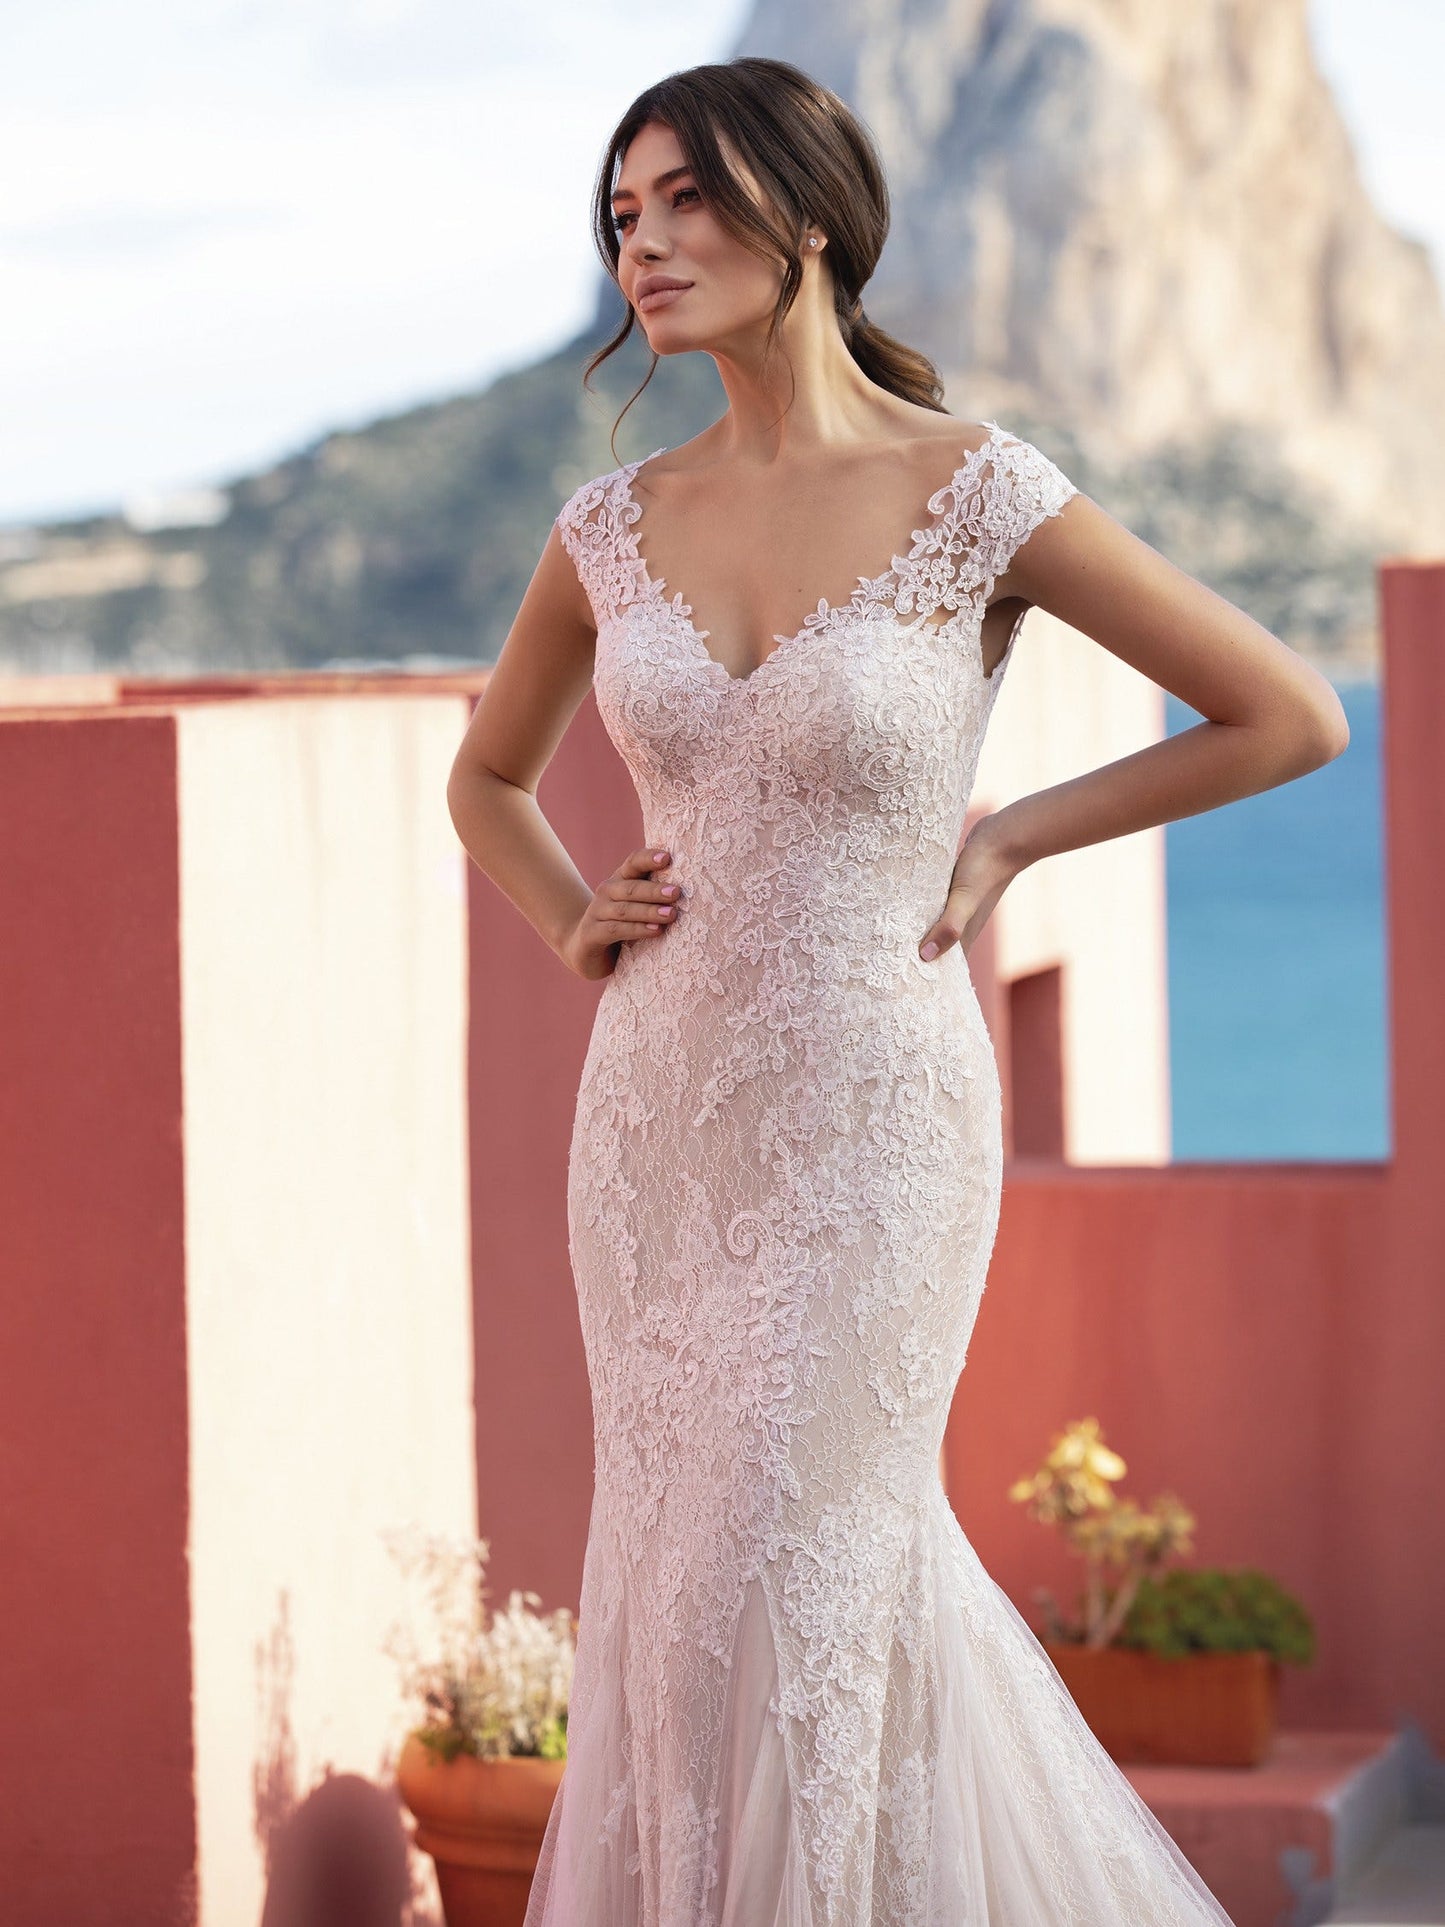 Pronovias White One Bridal CICELY  Gorgeous embroidered tulle lends a romantic, heirloom look to this sensual mermaid dress that flatters curves in all the right places. With a sexy illusion back and chapel train with a scalloped edge.  Silhouette / Cut Mermaid Neckline V-neck